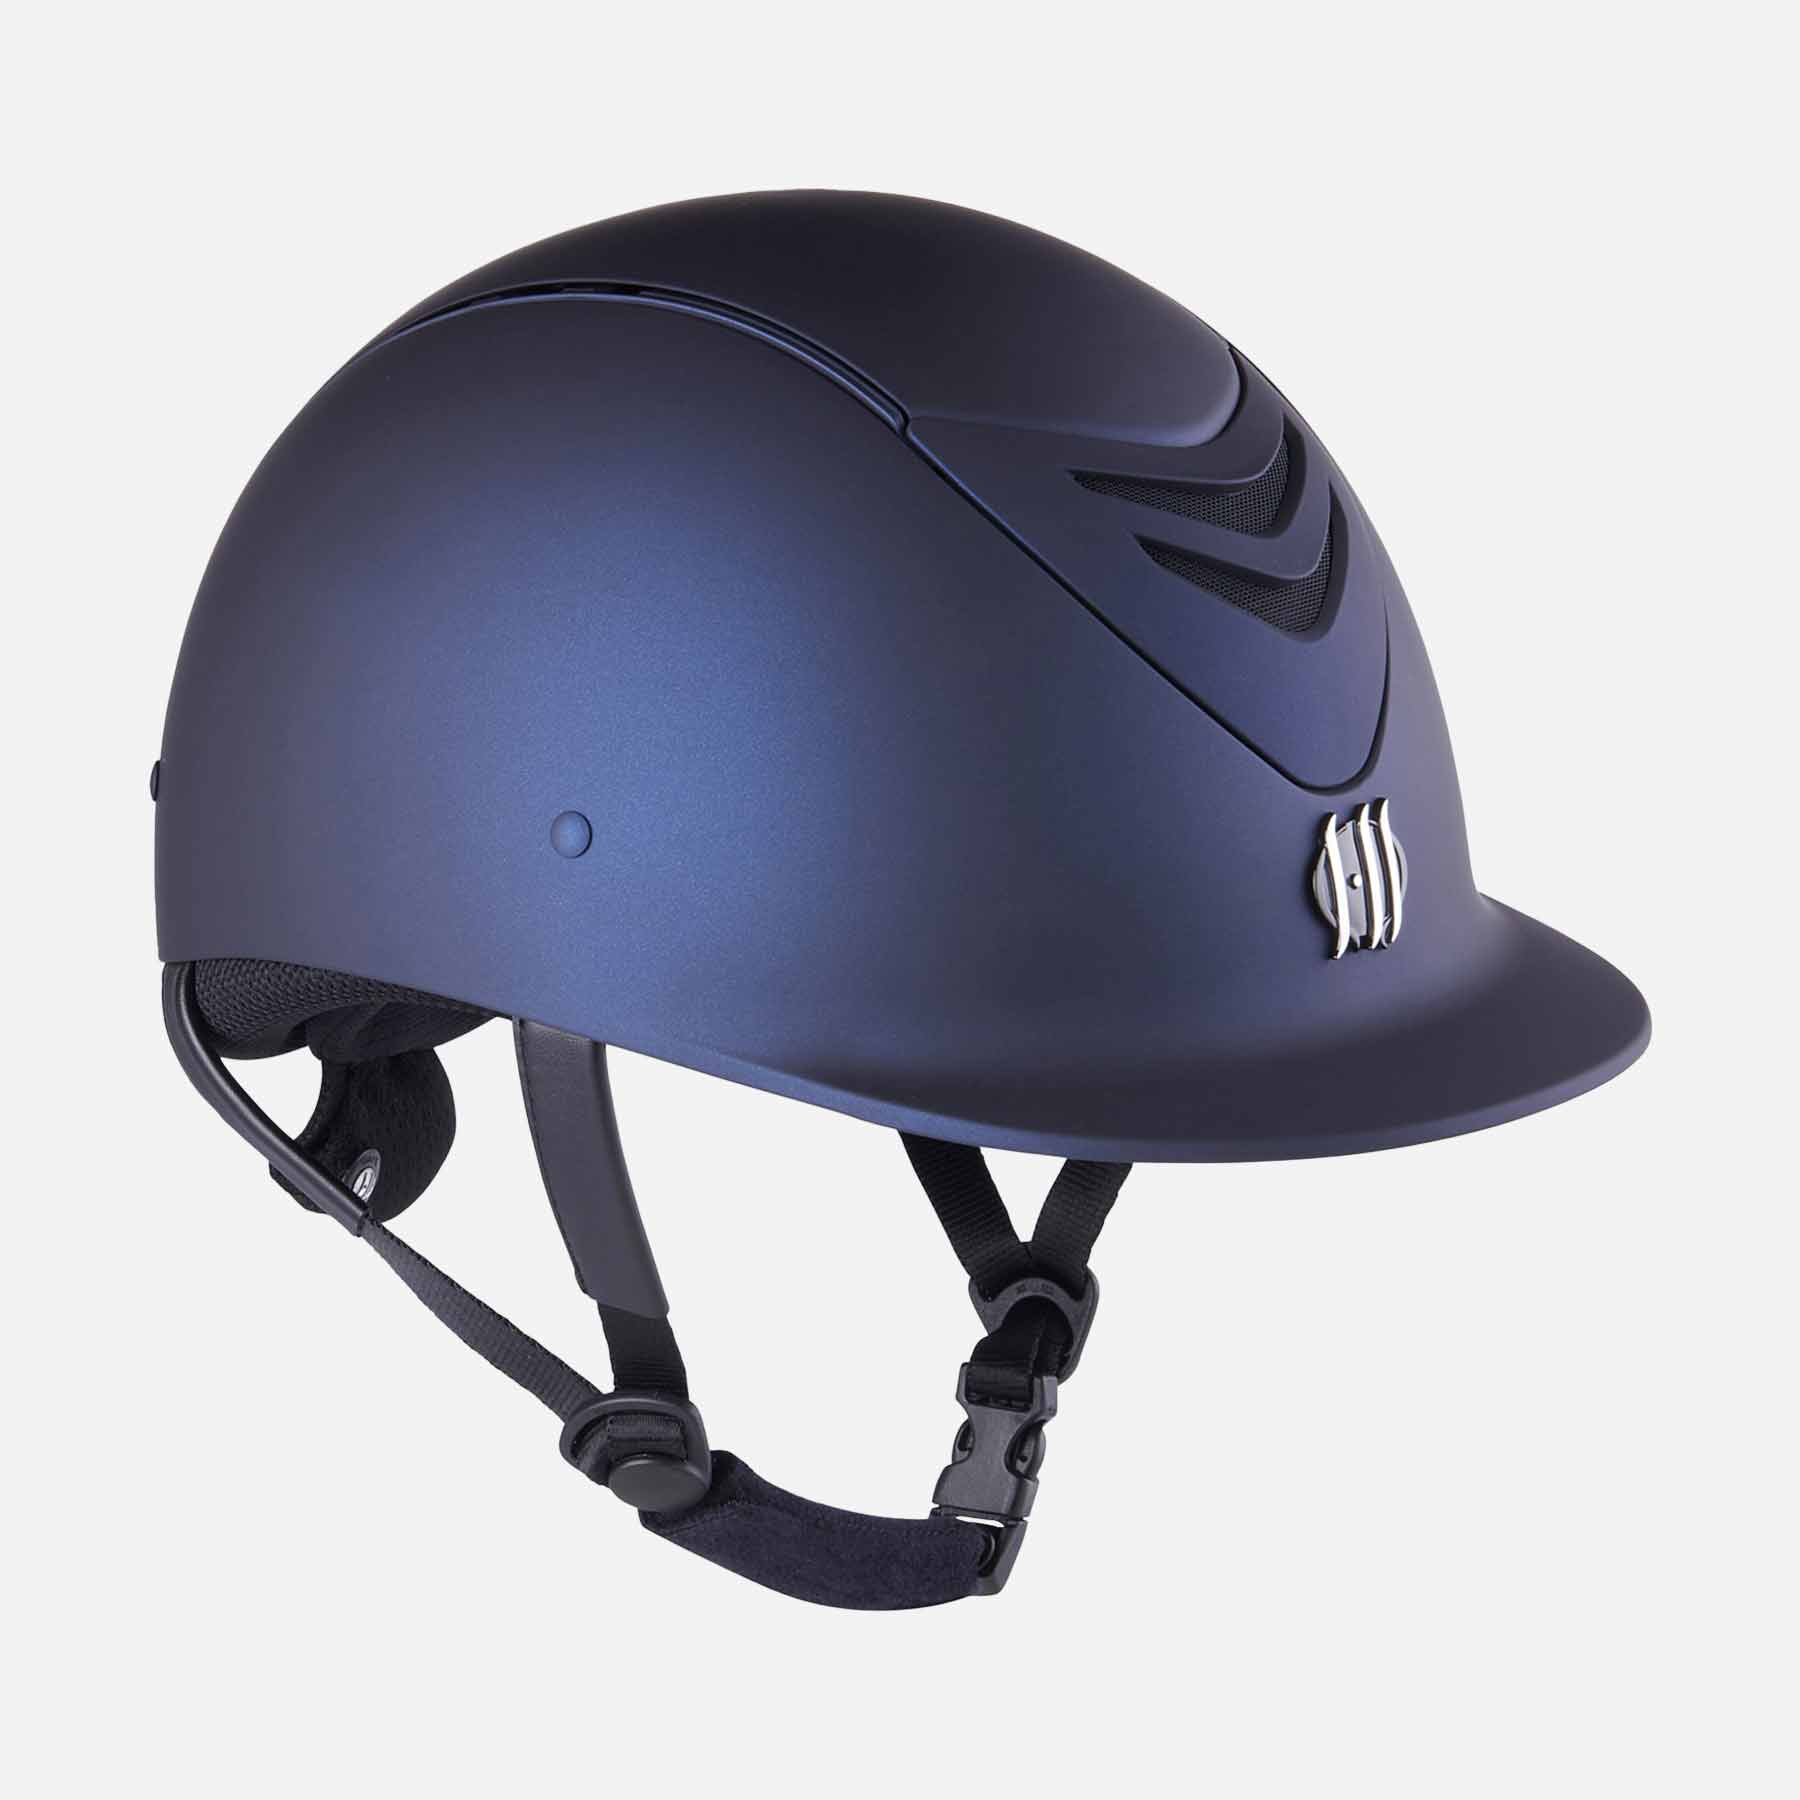 How Often Should You Change Your Riding Hat (Complete Guide)